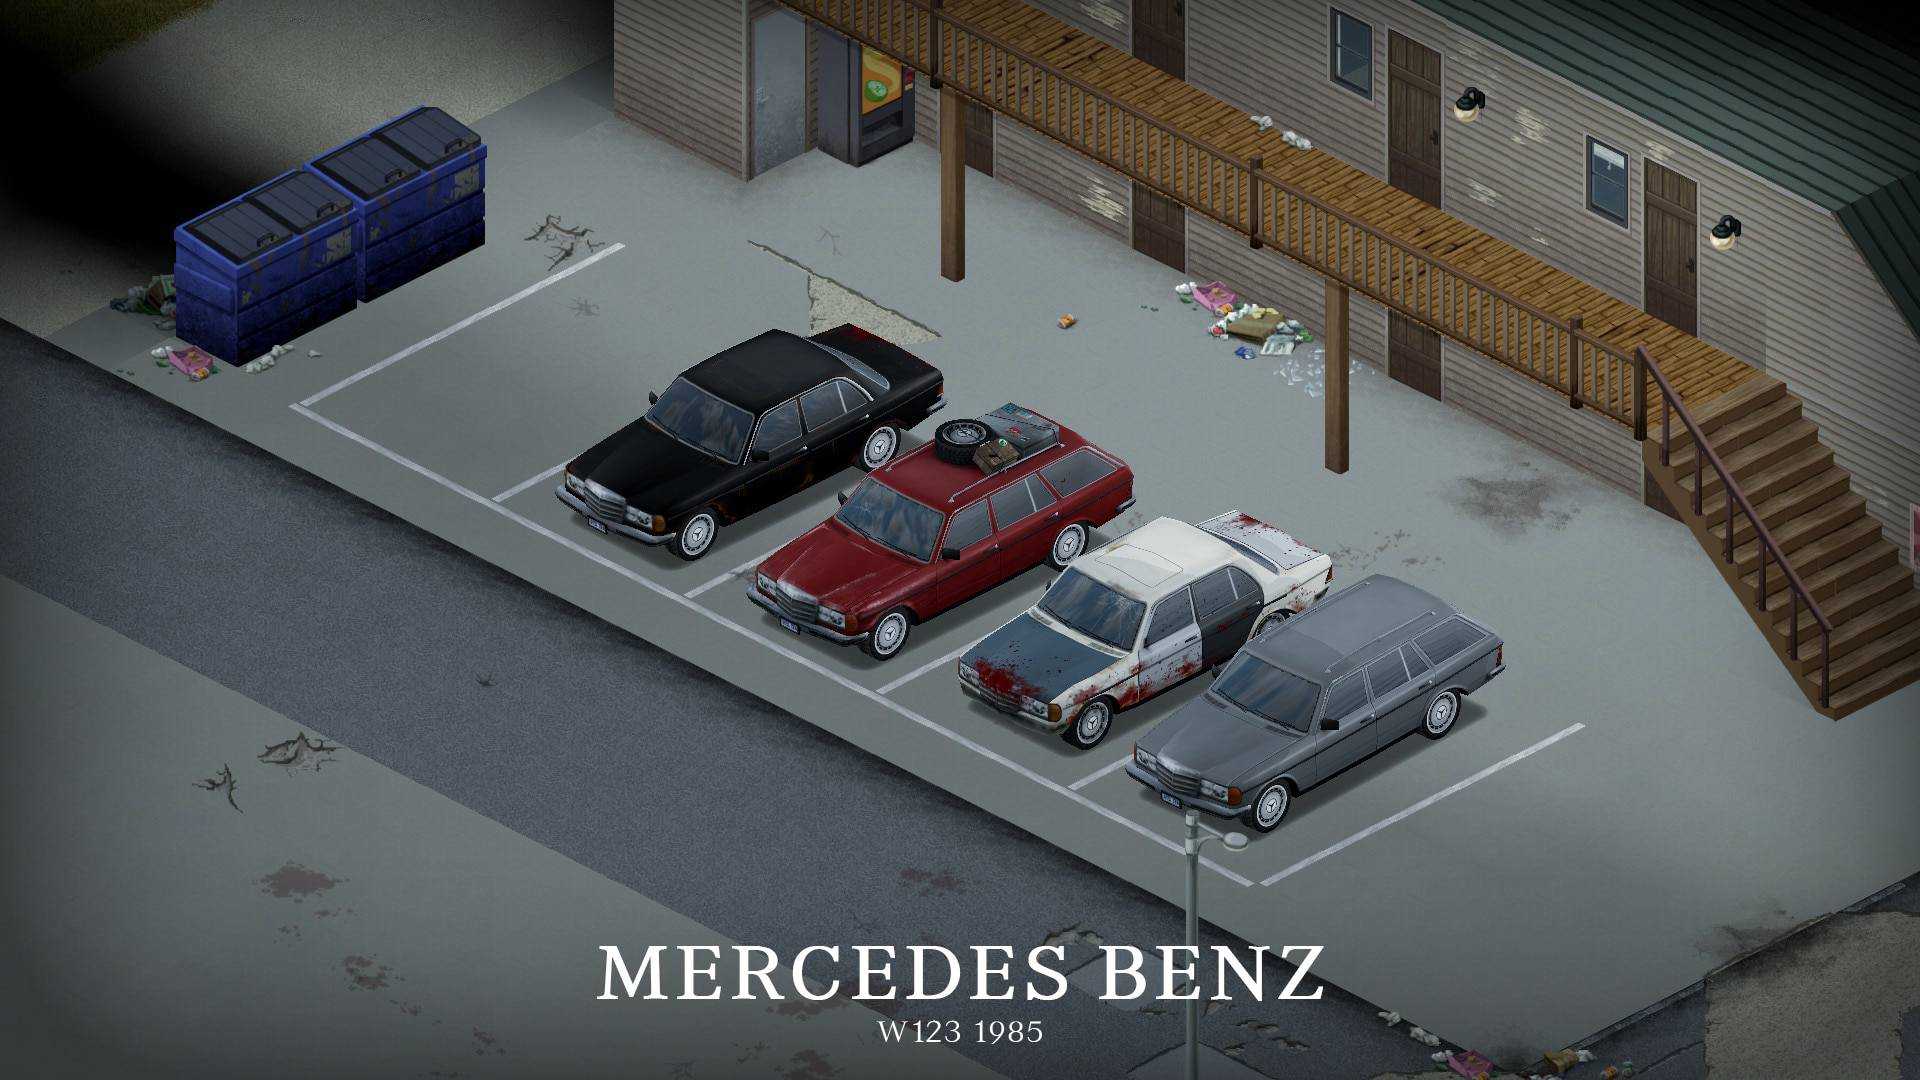 Project zomboid mechanics: how to make changes to vehicles